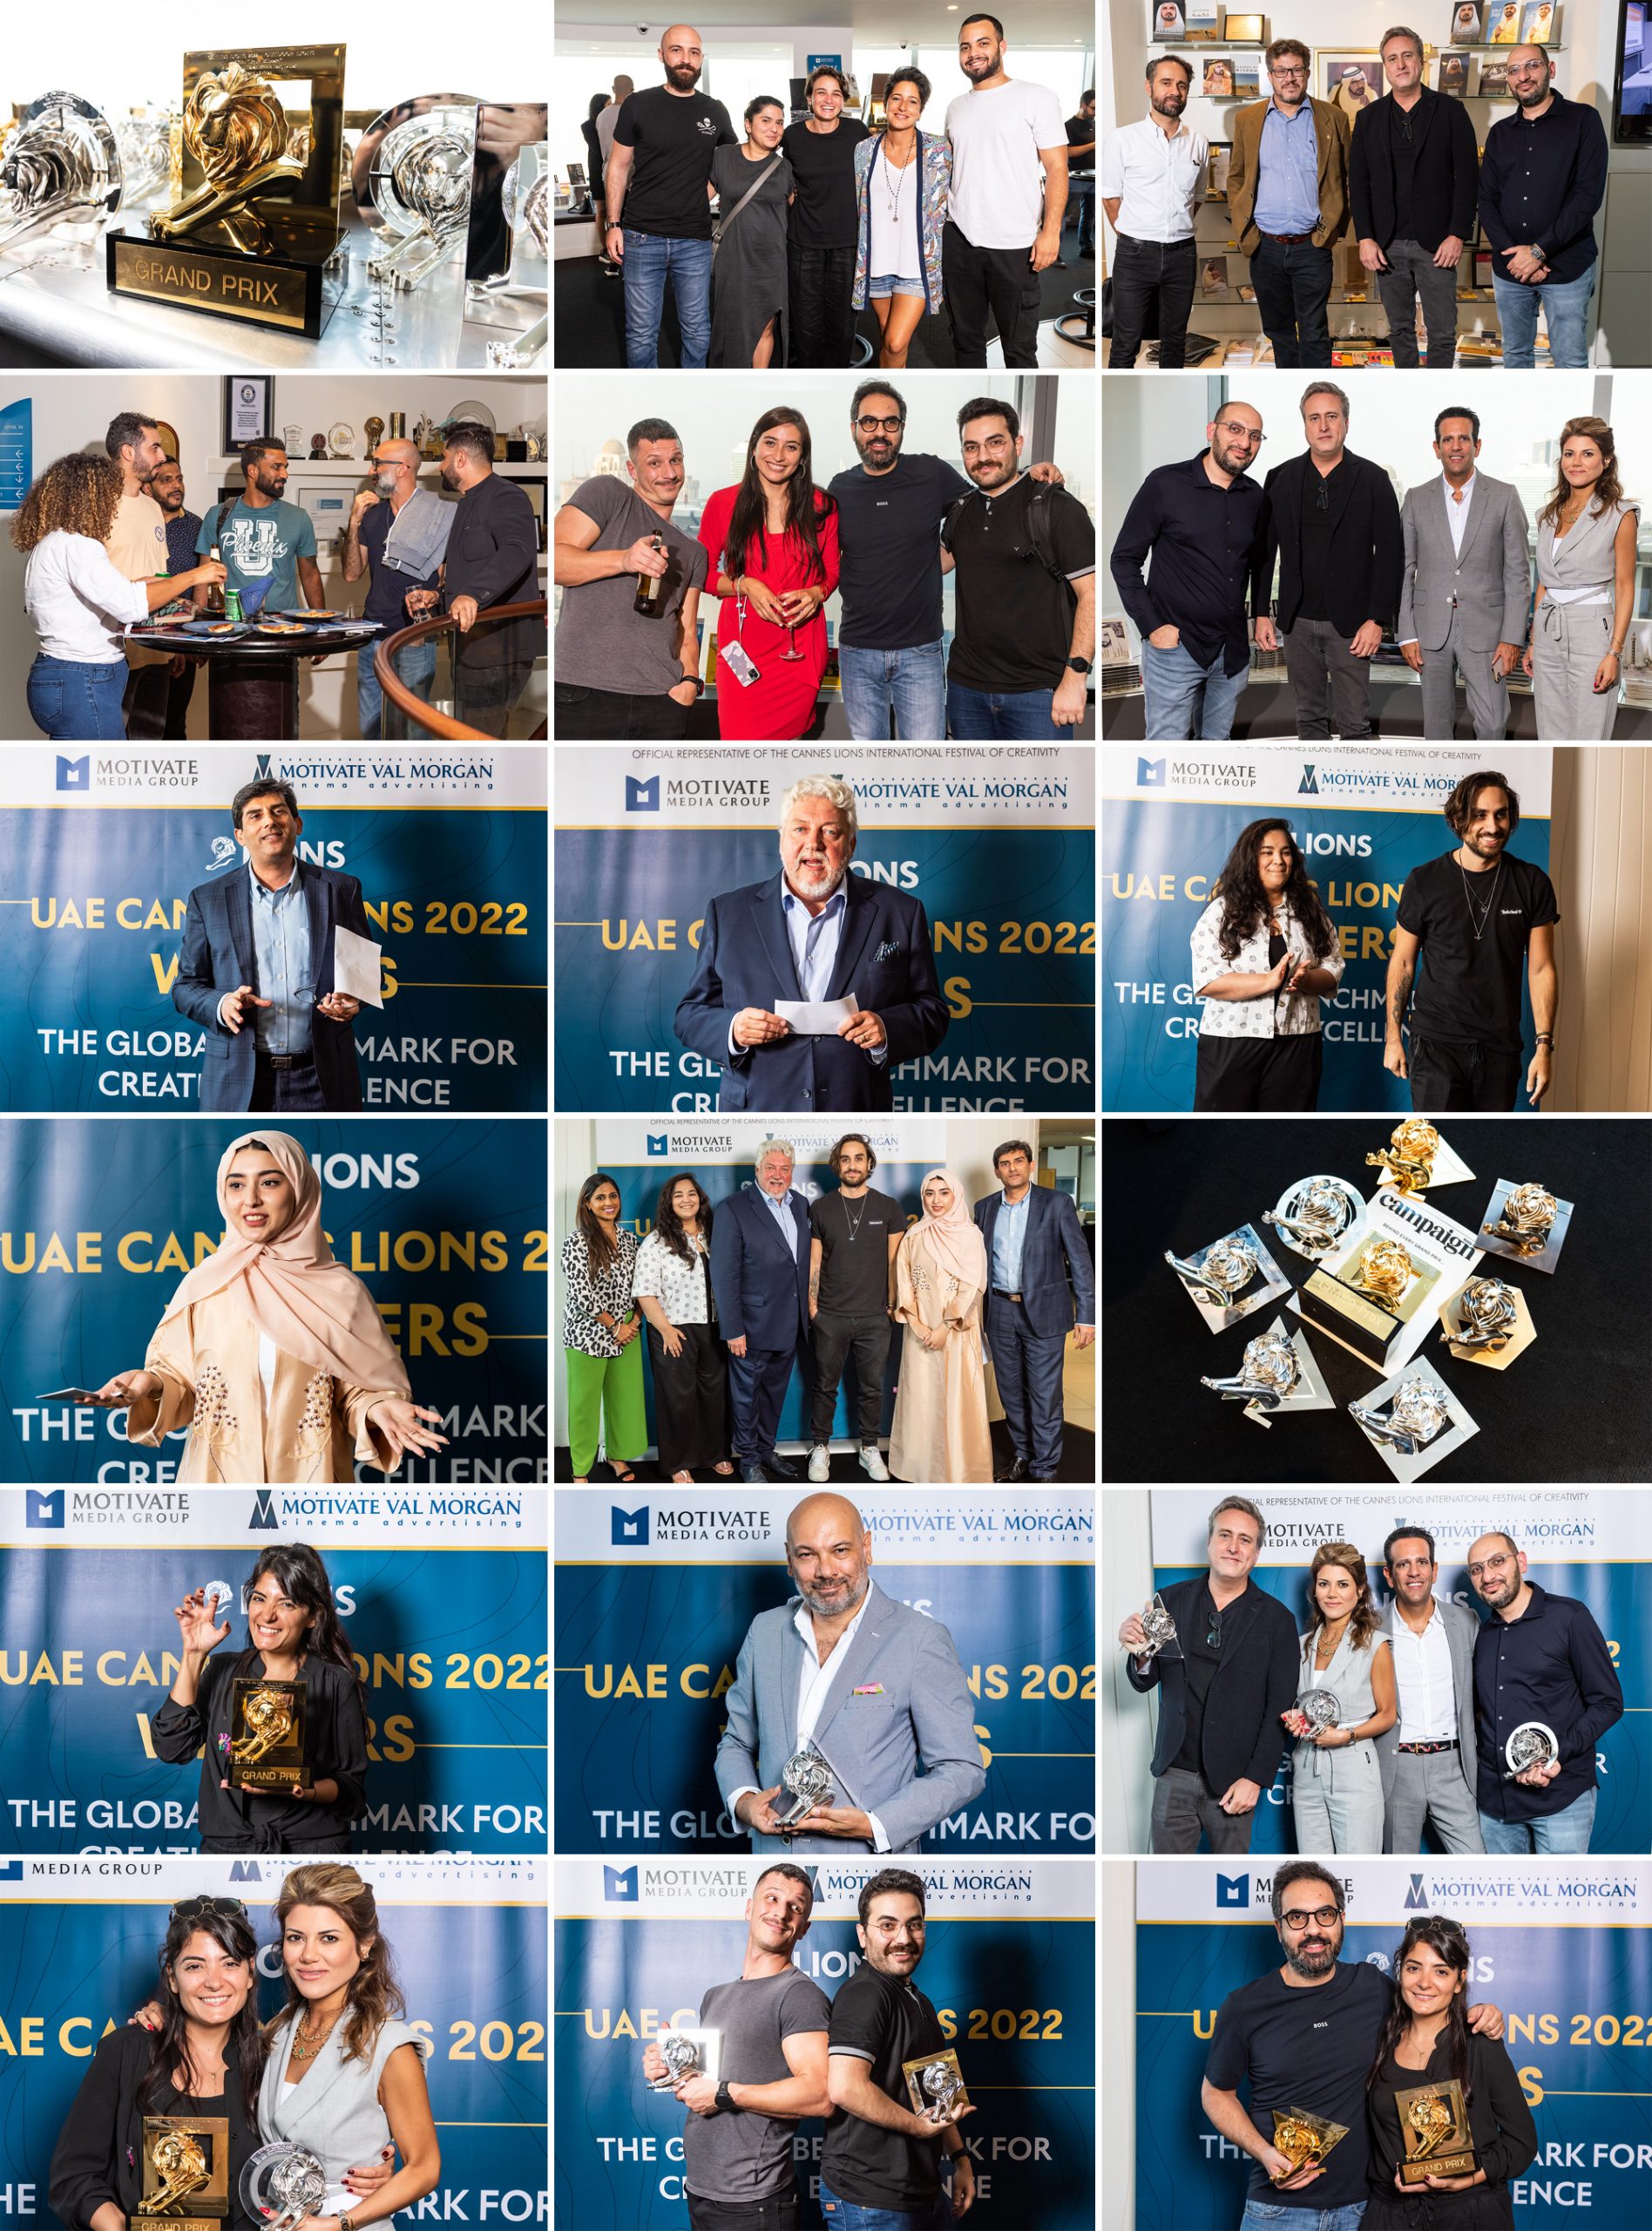 Highlights of 2022 UAE Cannes Lions Awards Ceremony